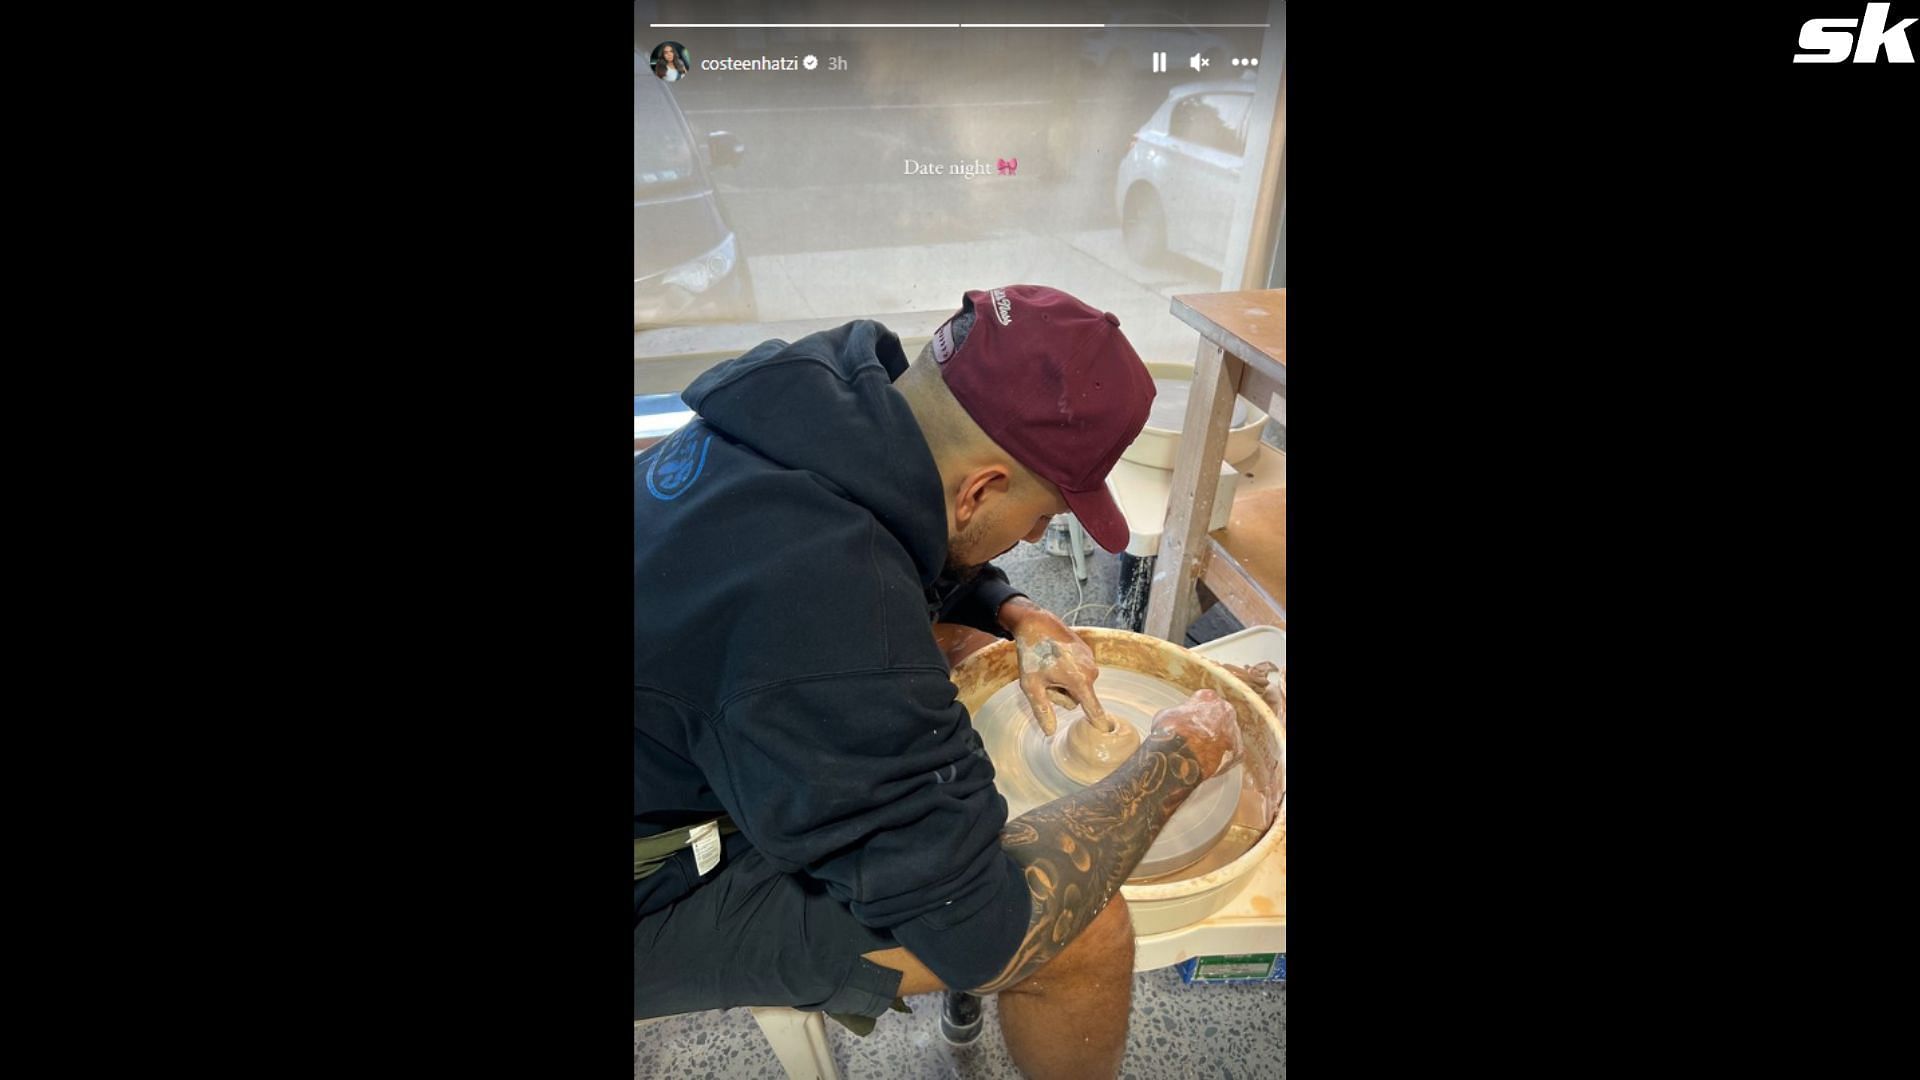 Costeen Hatzi captures Nick Kyrgios engrossed doing pottery during their date night